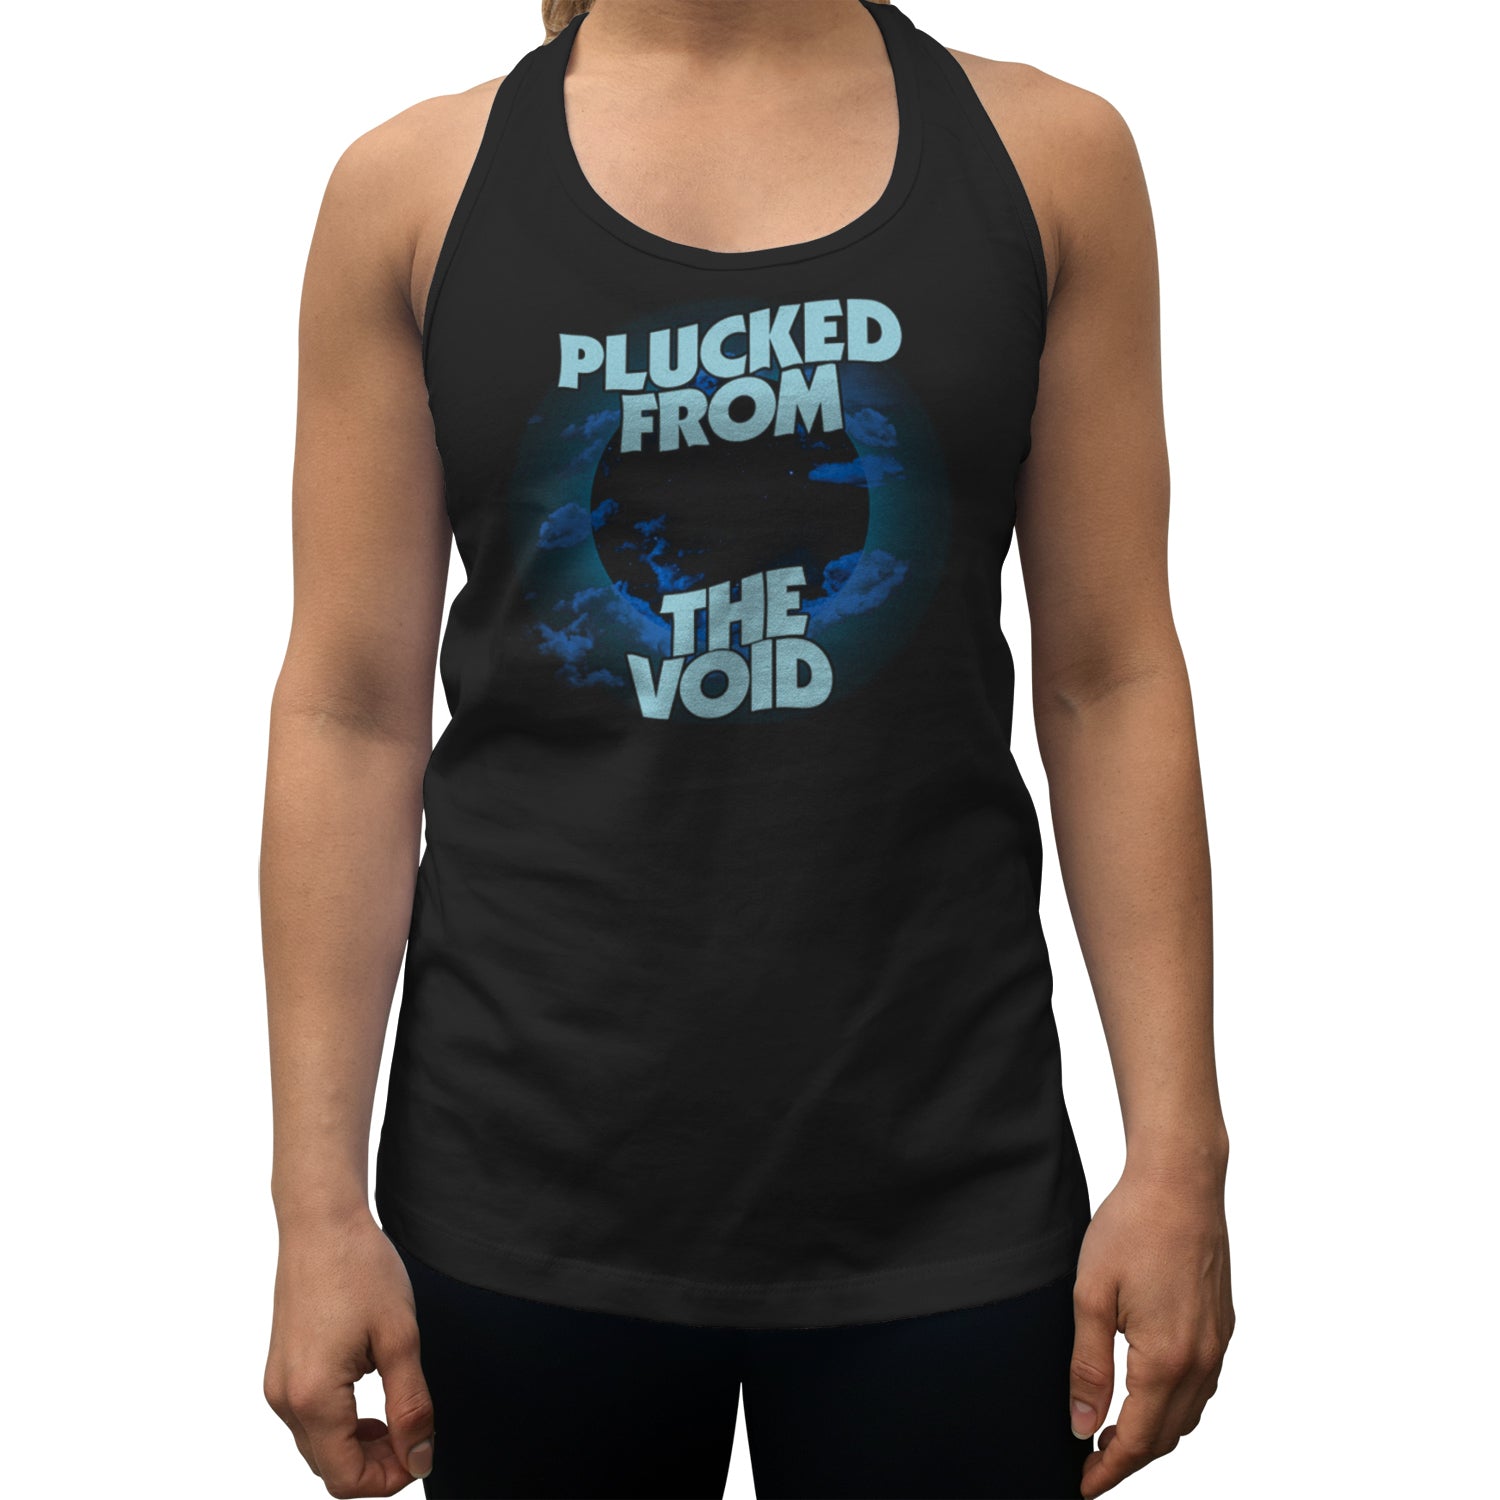 Women's Plucked From the Void Racerback Tank Top